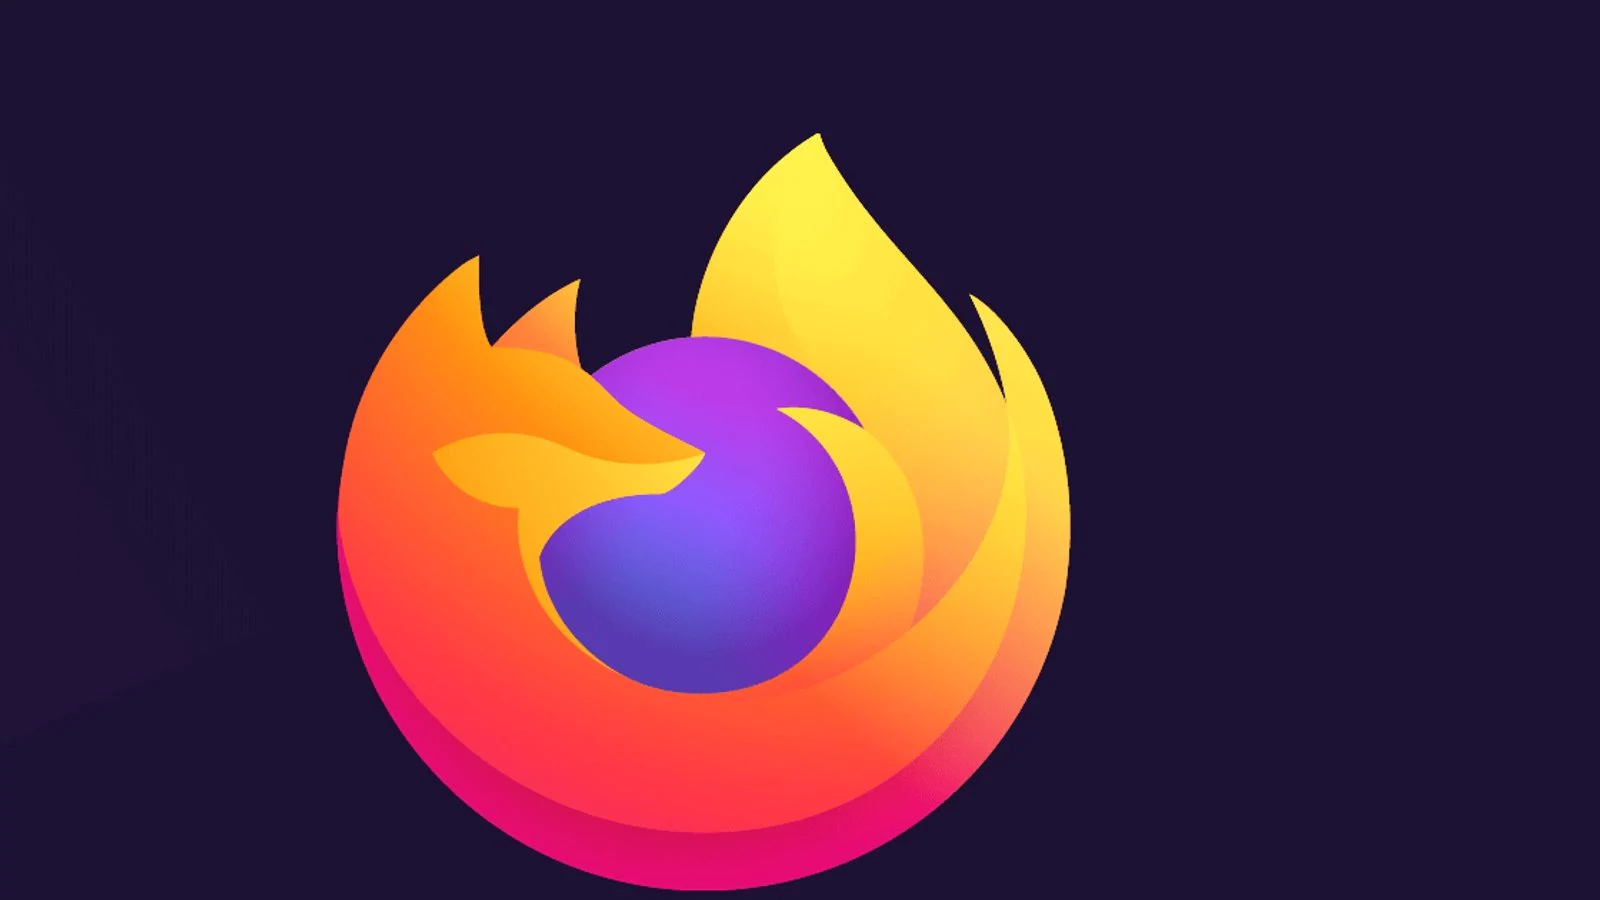 Indian Cyber Agency Warns Mozilla Firefox Users Of Potential Hacking Threat: All Details